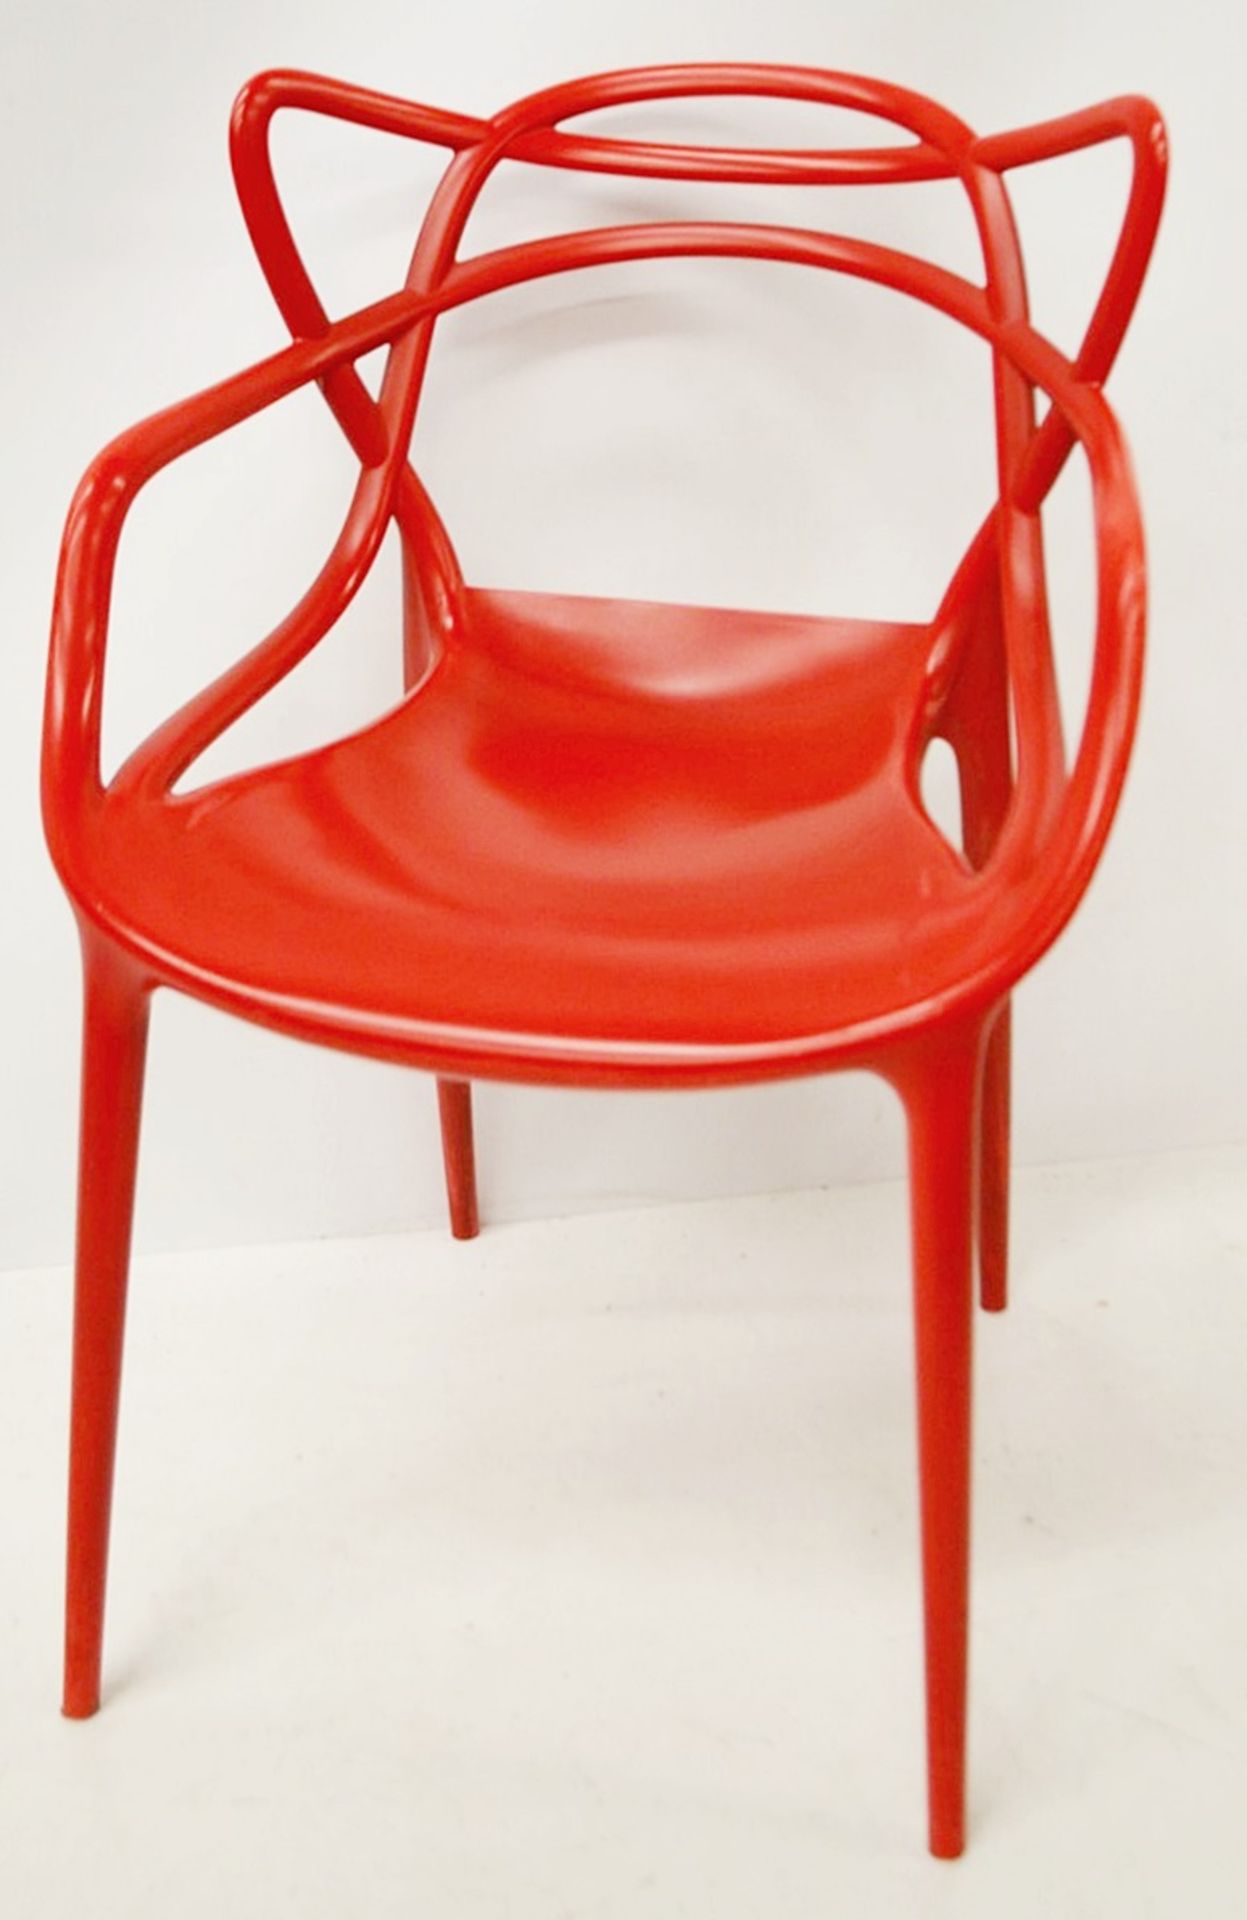 4 x Philippe Starck For Kartell 'Masters' Designer Red Gloss Bistro Chairs - Made In Italy - Used